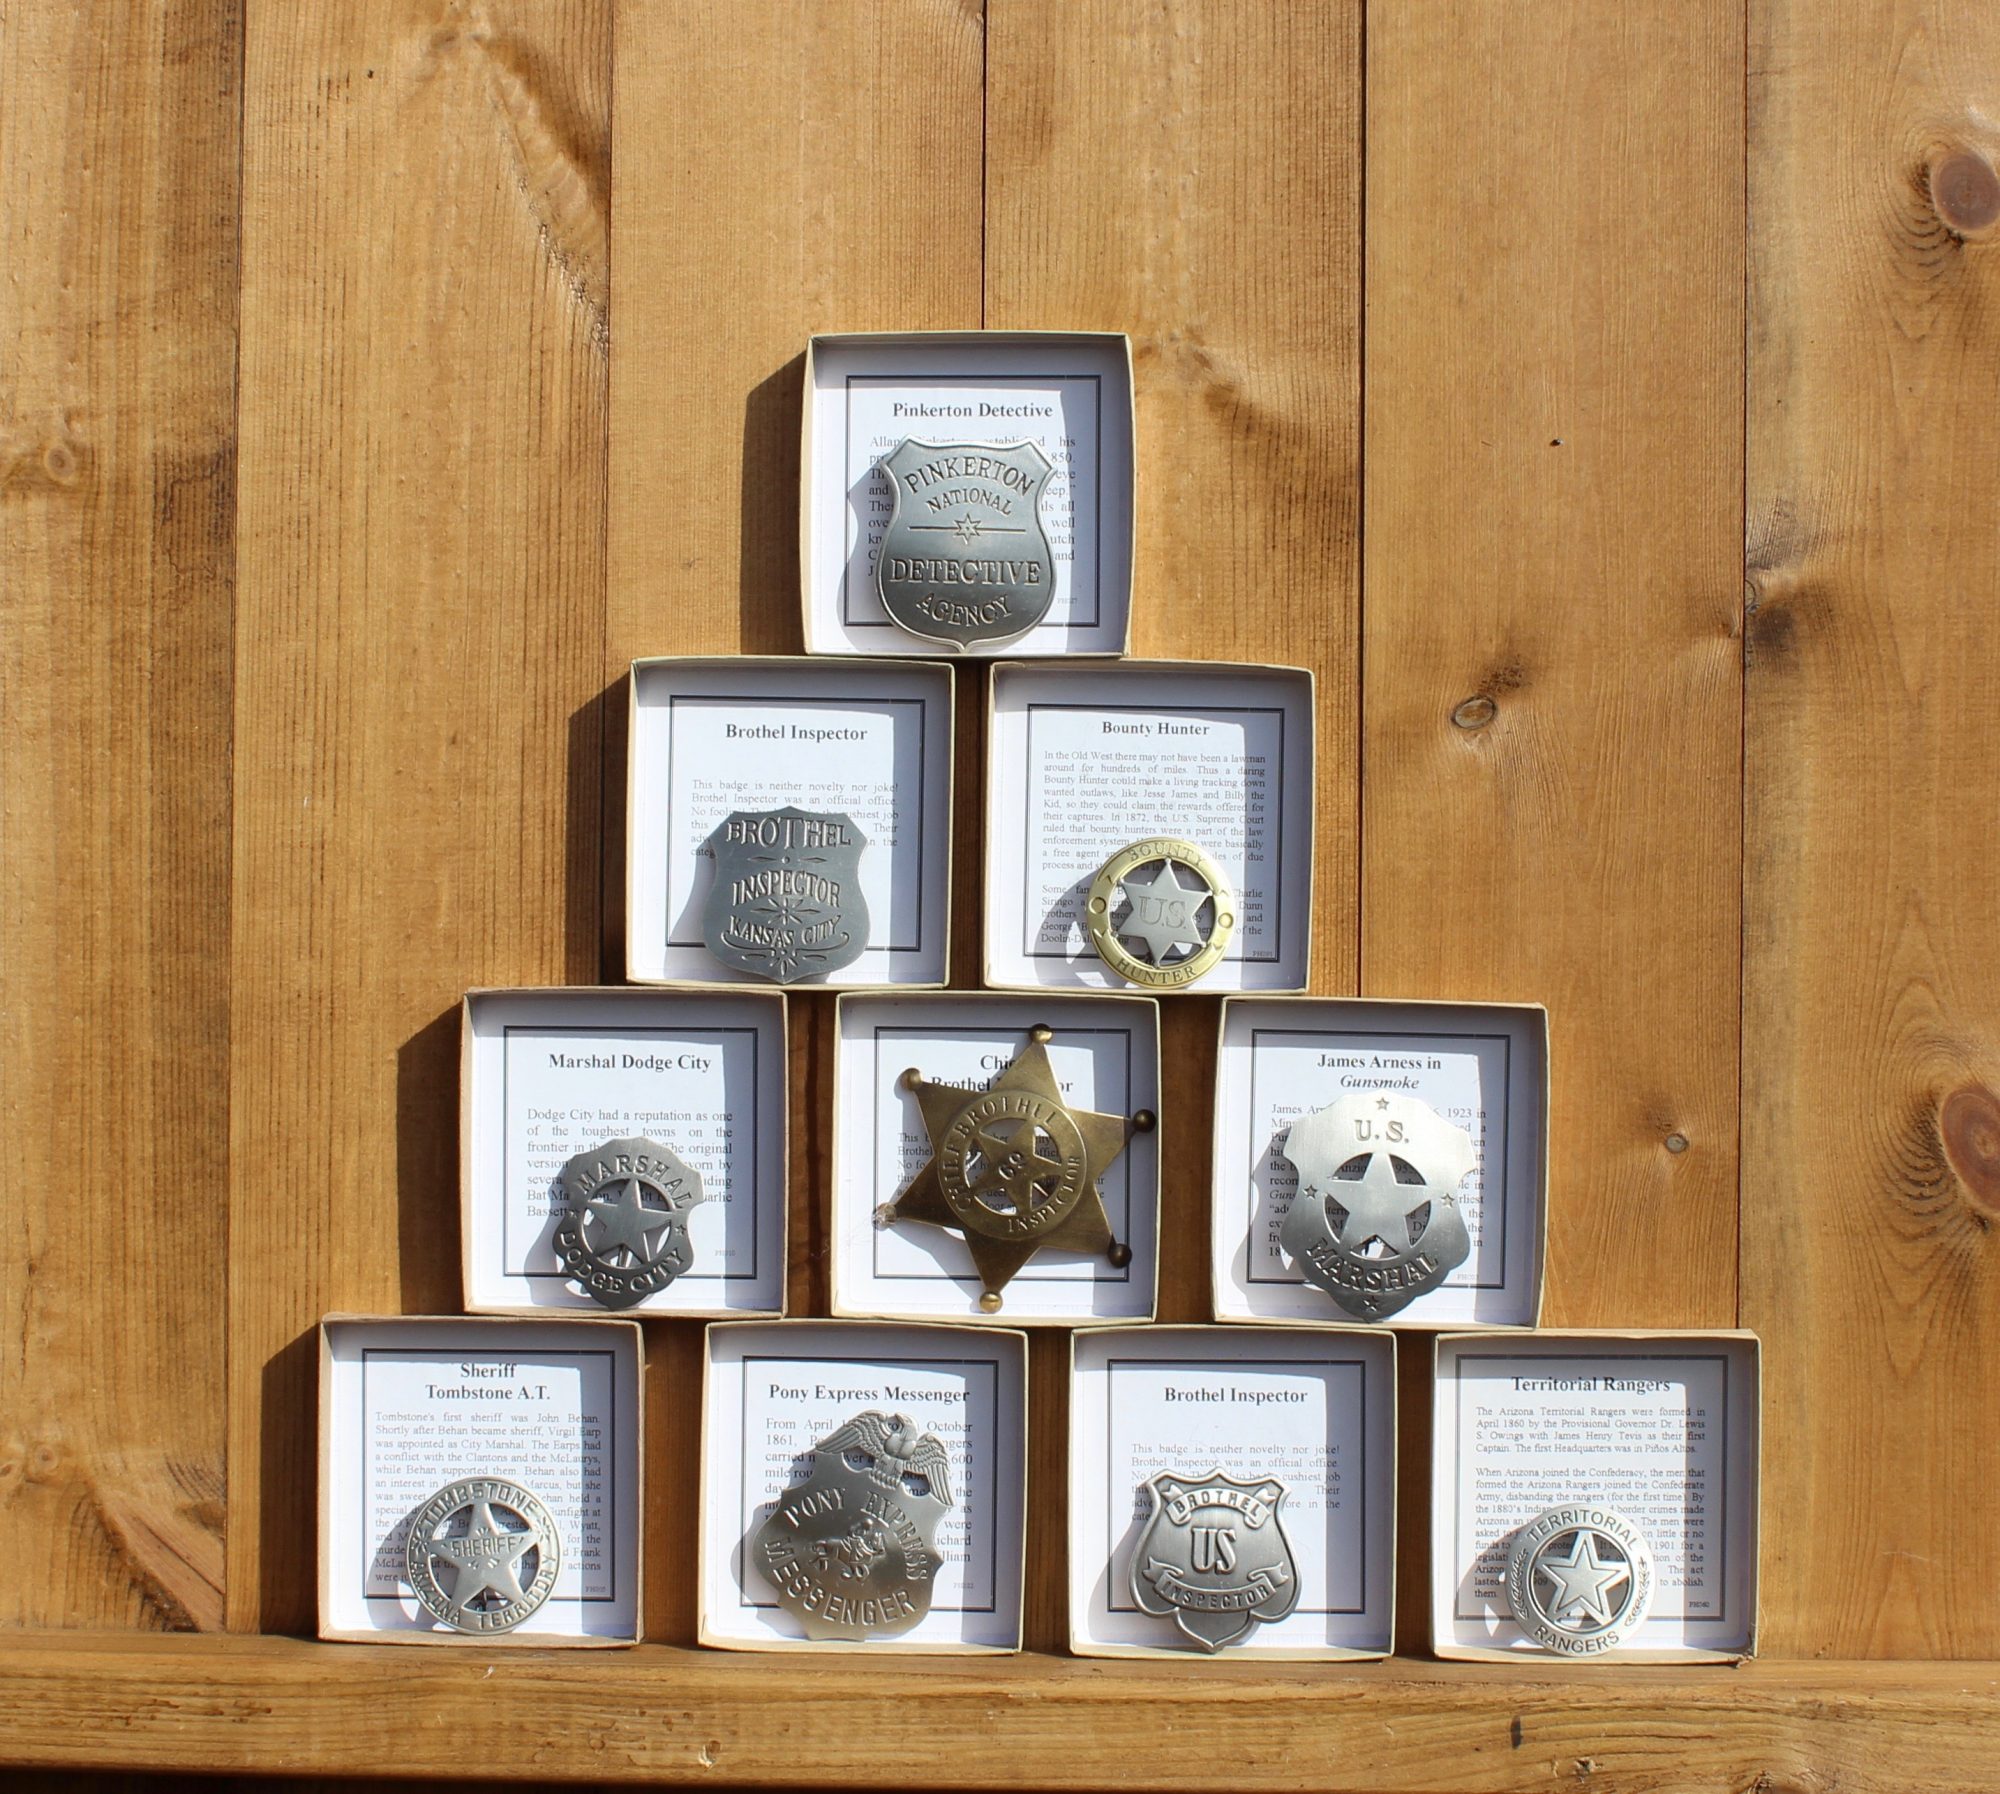 Vintage 1950's / 1960's Gonher / Barval Sheriff Star Pin Badge - Set Of 12  On Shop Display Card - Un Punched